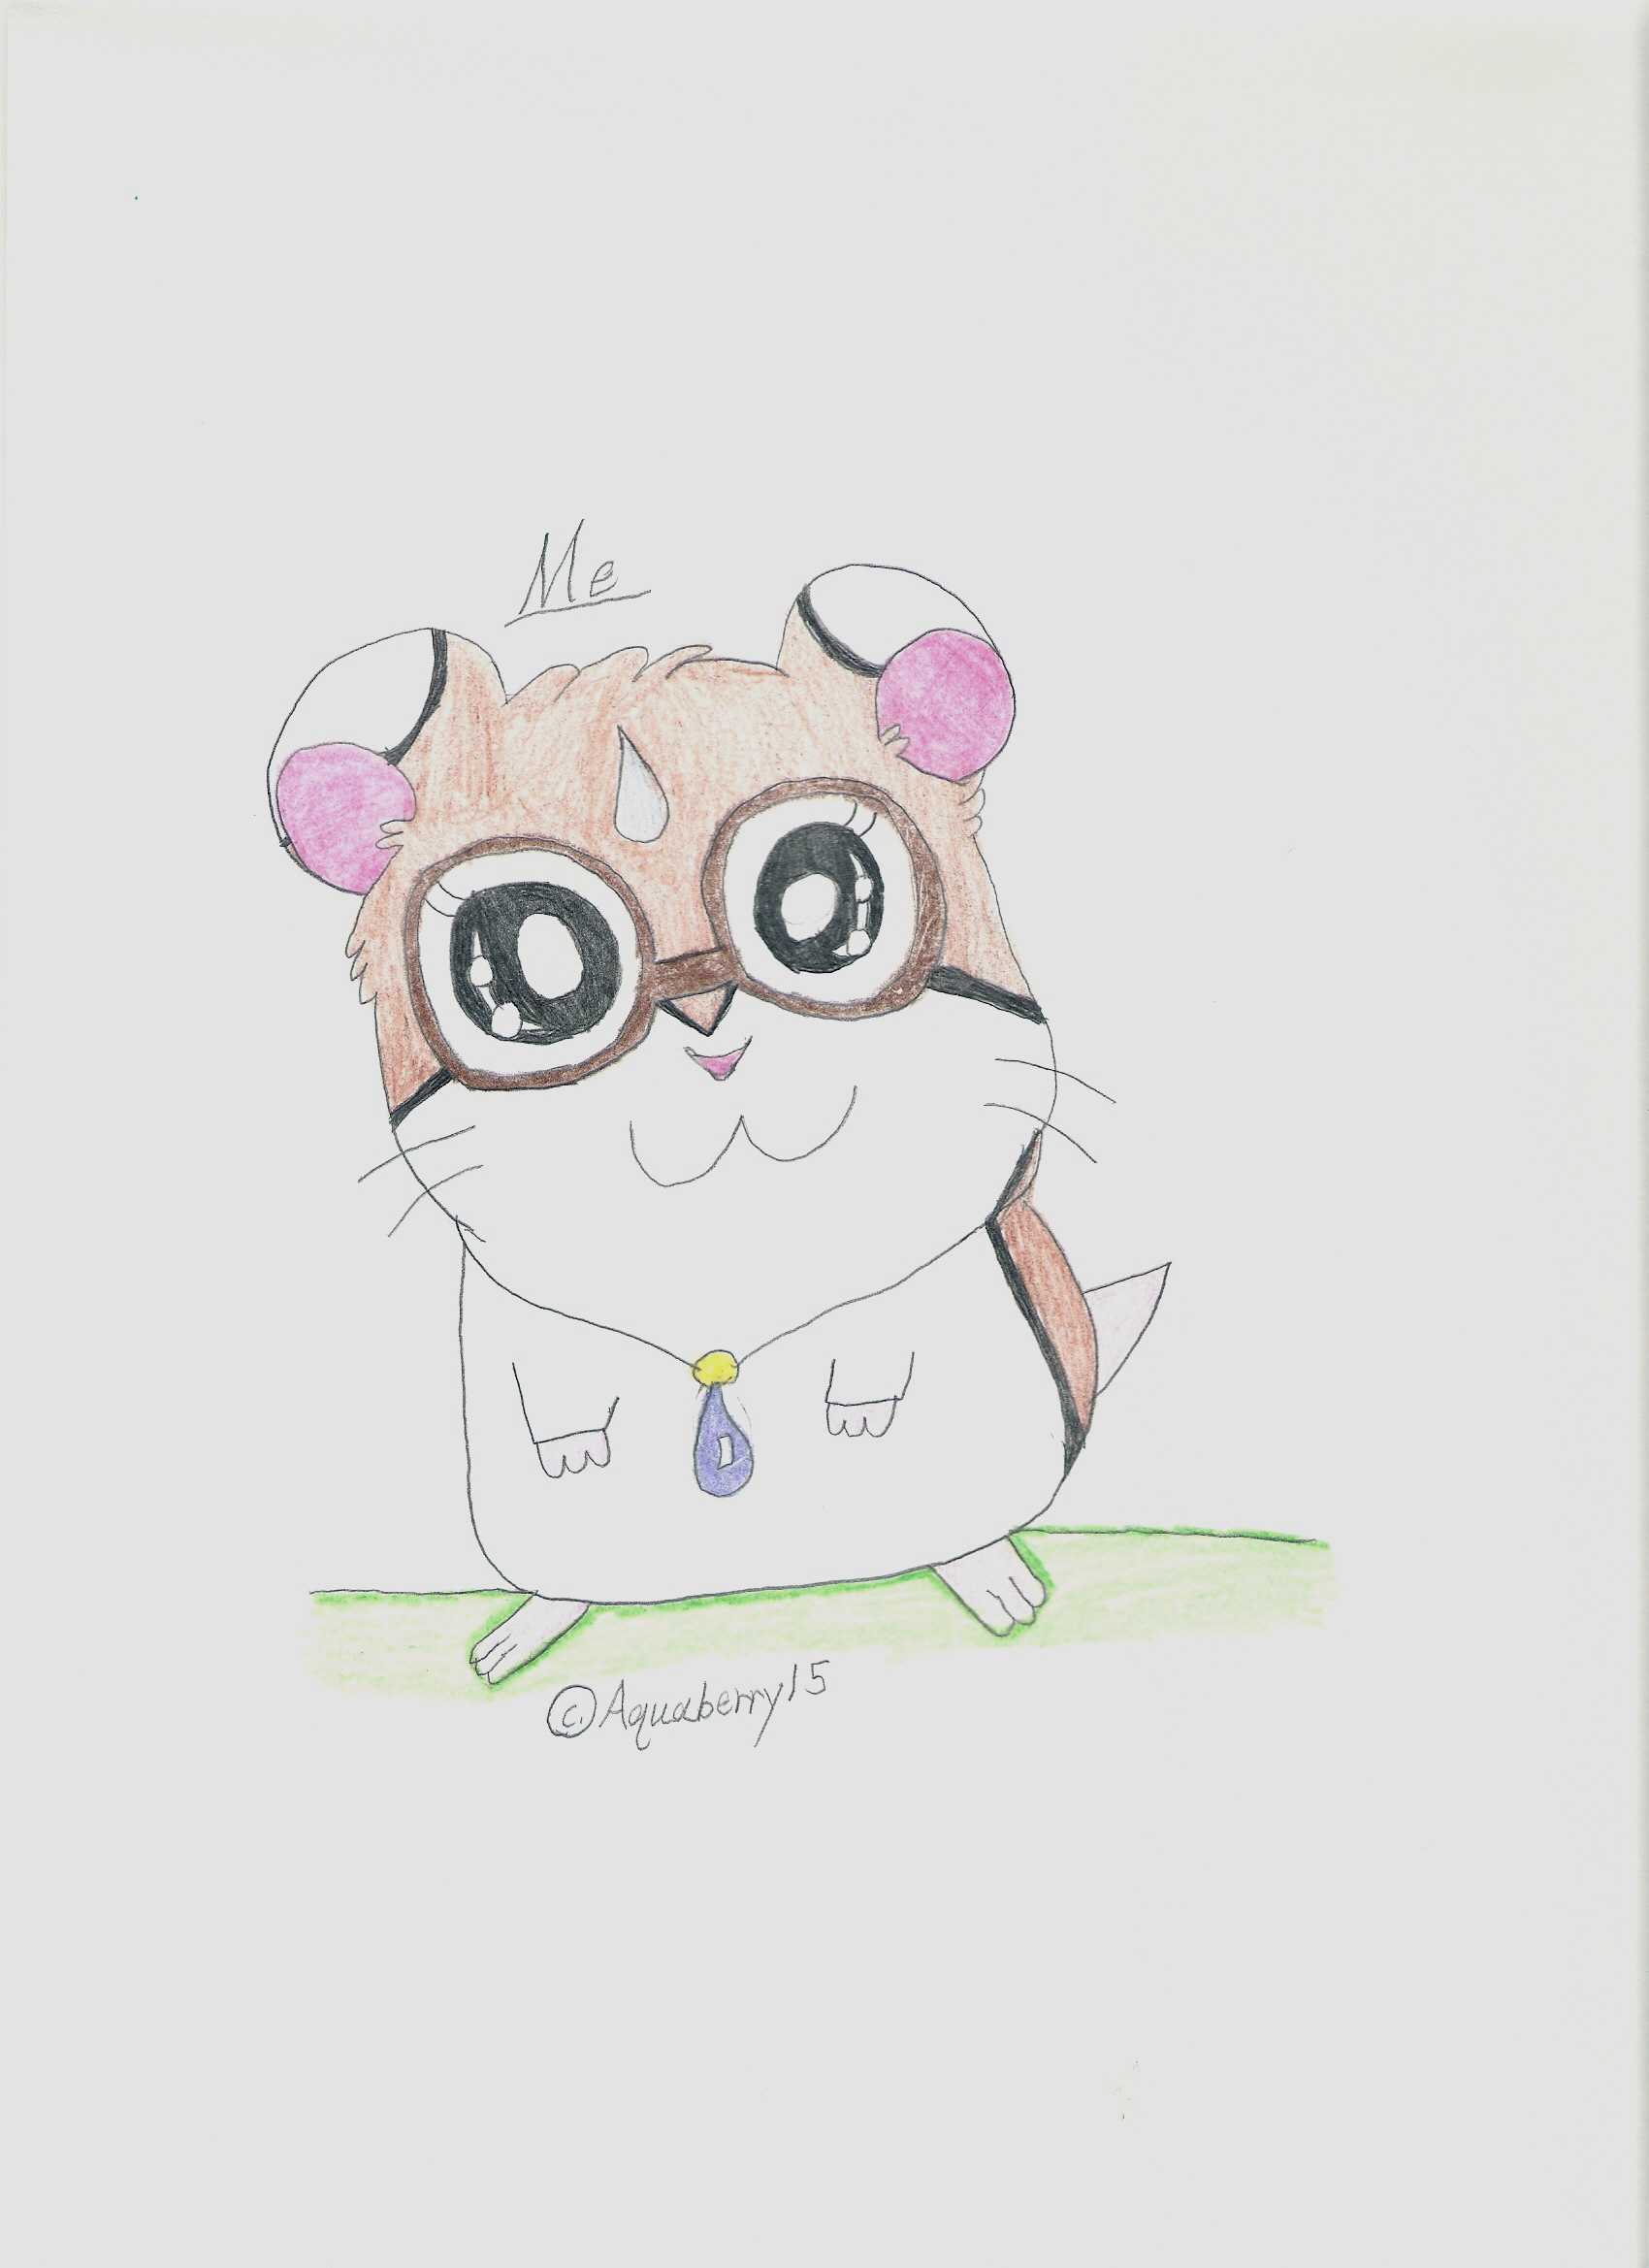 Me as a Hamtaro Charater by Aquaberry15